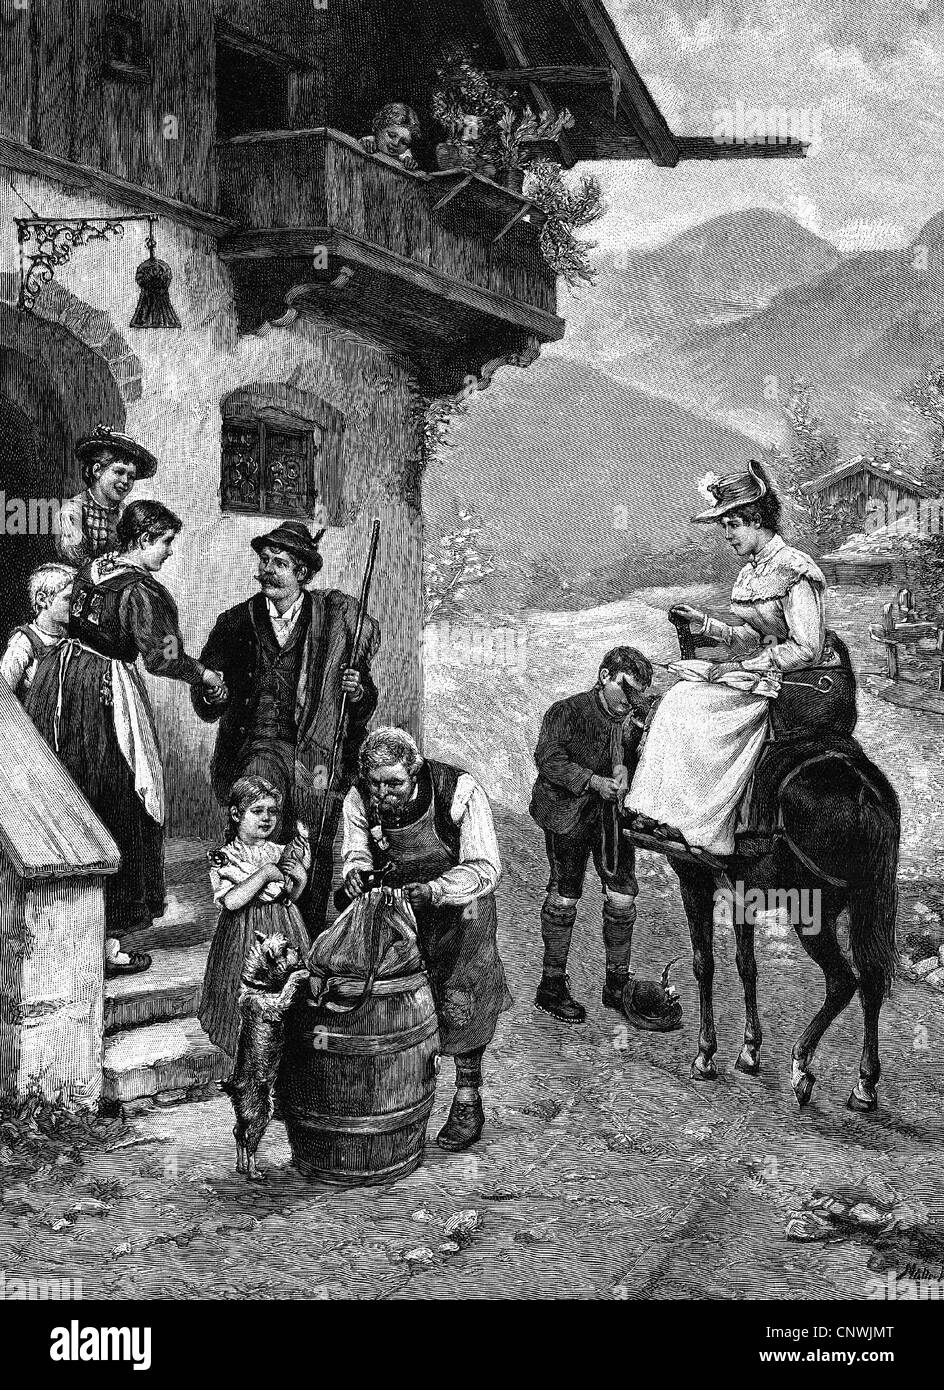 tourism, 'Auf der Alpenreise' (On an Alpine journey), after painting by U.Müller-Linke, wood engraving, 1895, Additional-Rights-Clearences-Not Available Stock Photo